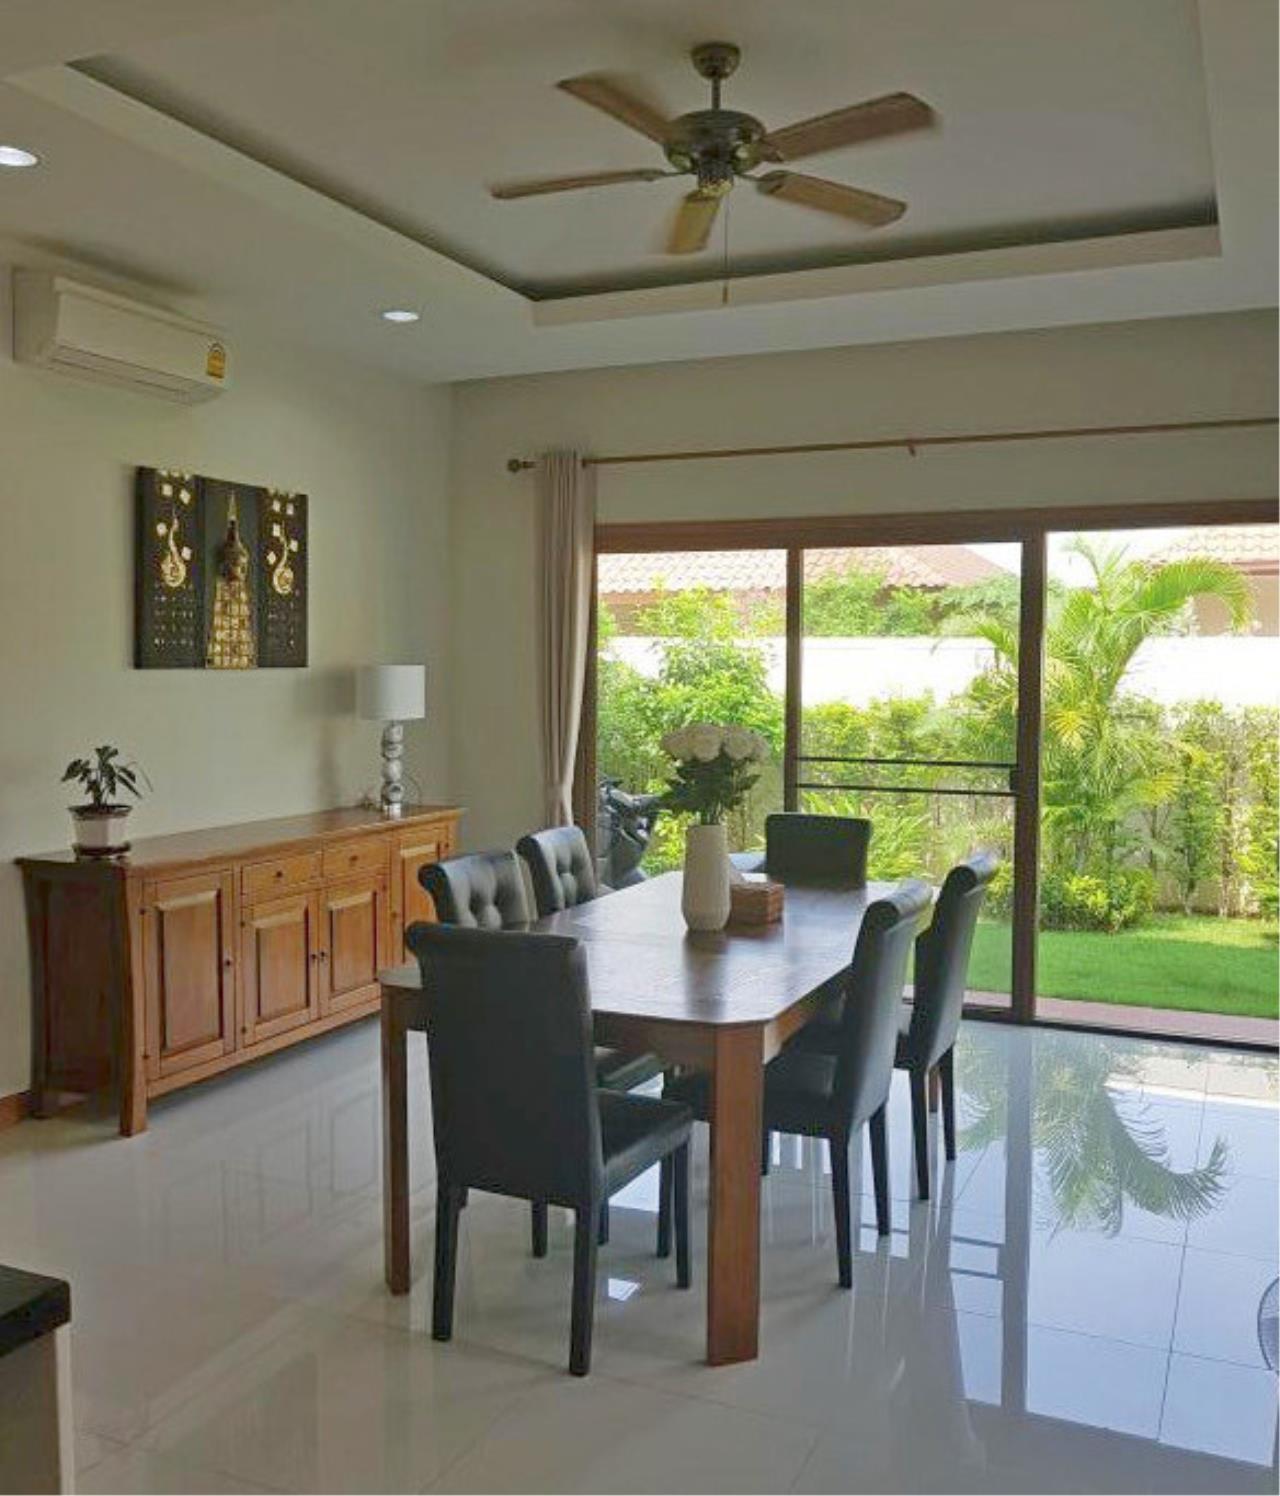 RE/MAX Town & Country Property Agency's Beautiful 3 bedroom house in Huay Yai 7